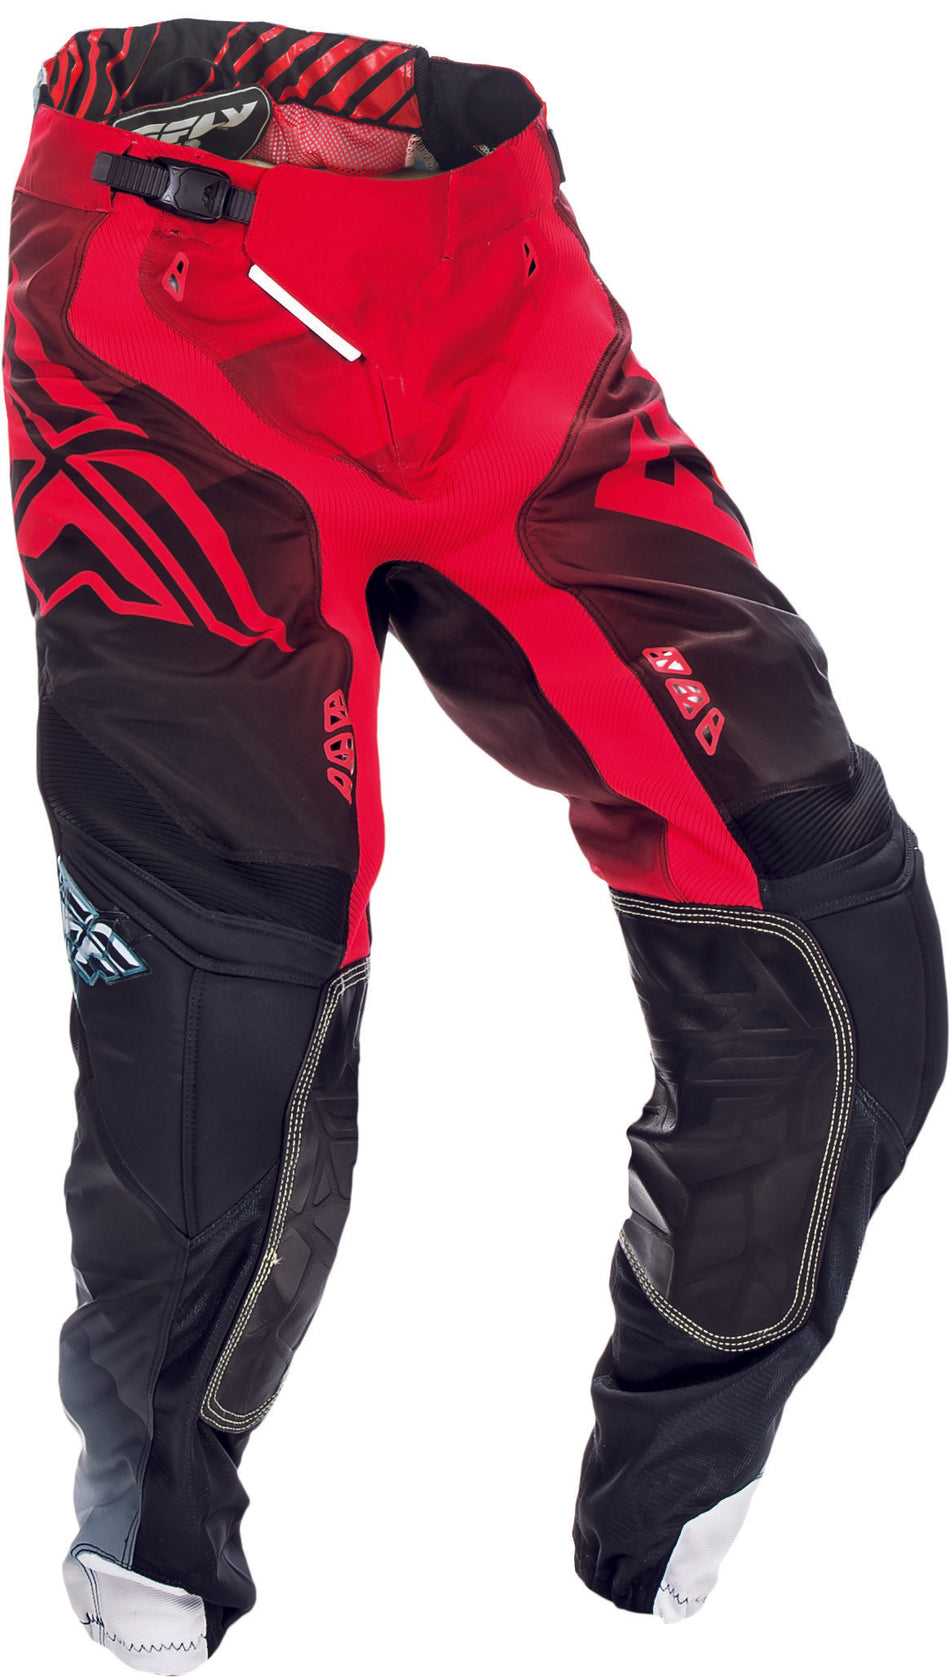 FLY RACING Lite Hydrogen Pant Red/Black/White Sz 36 370-73236